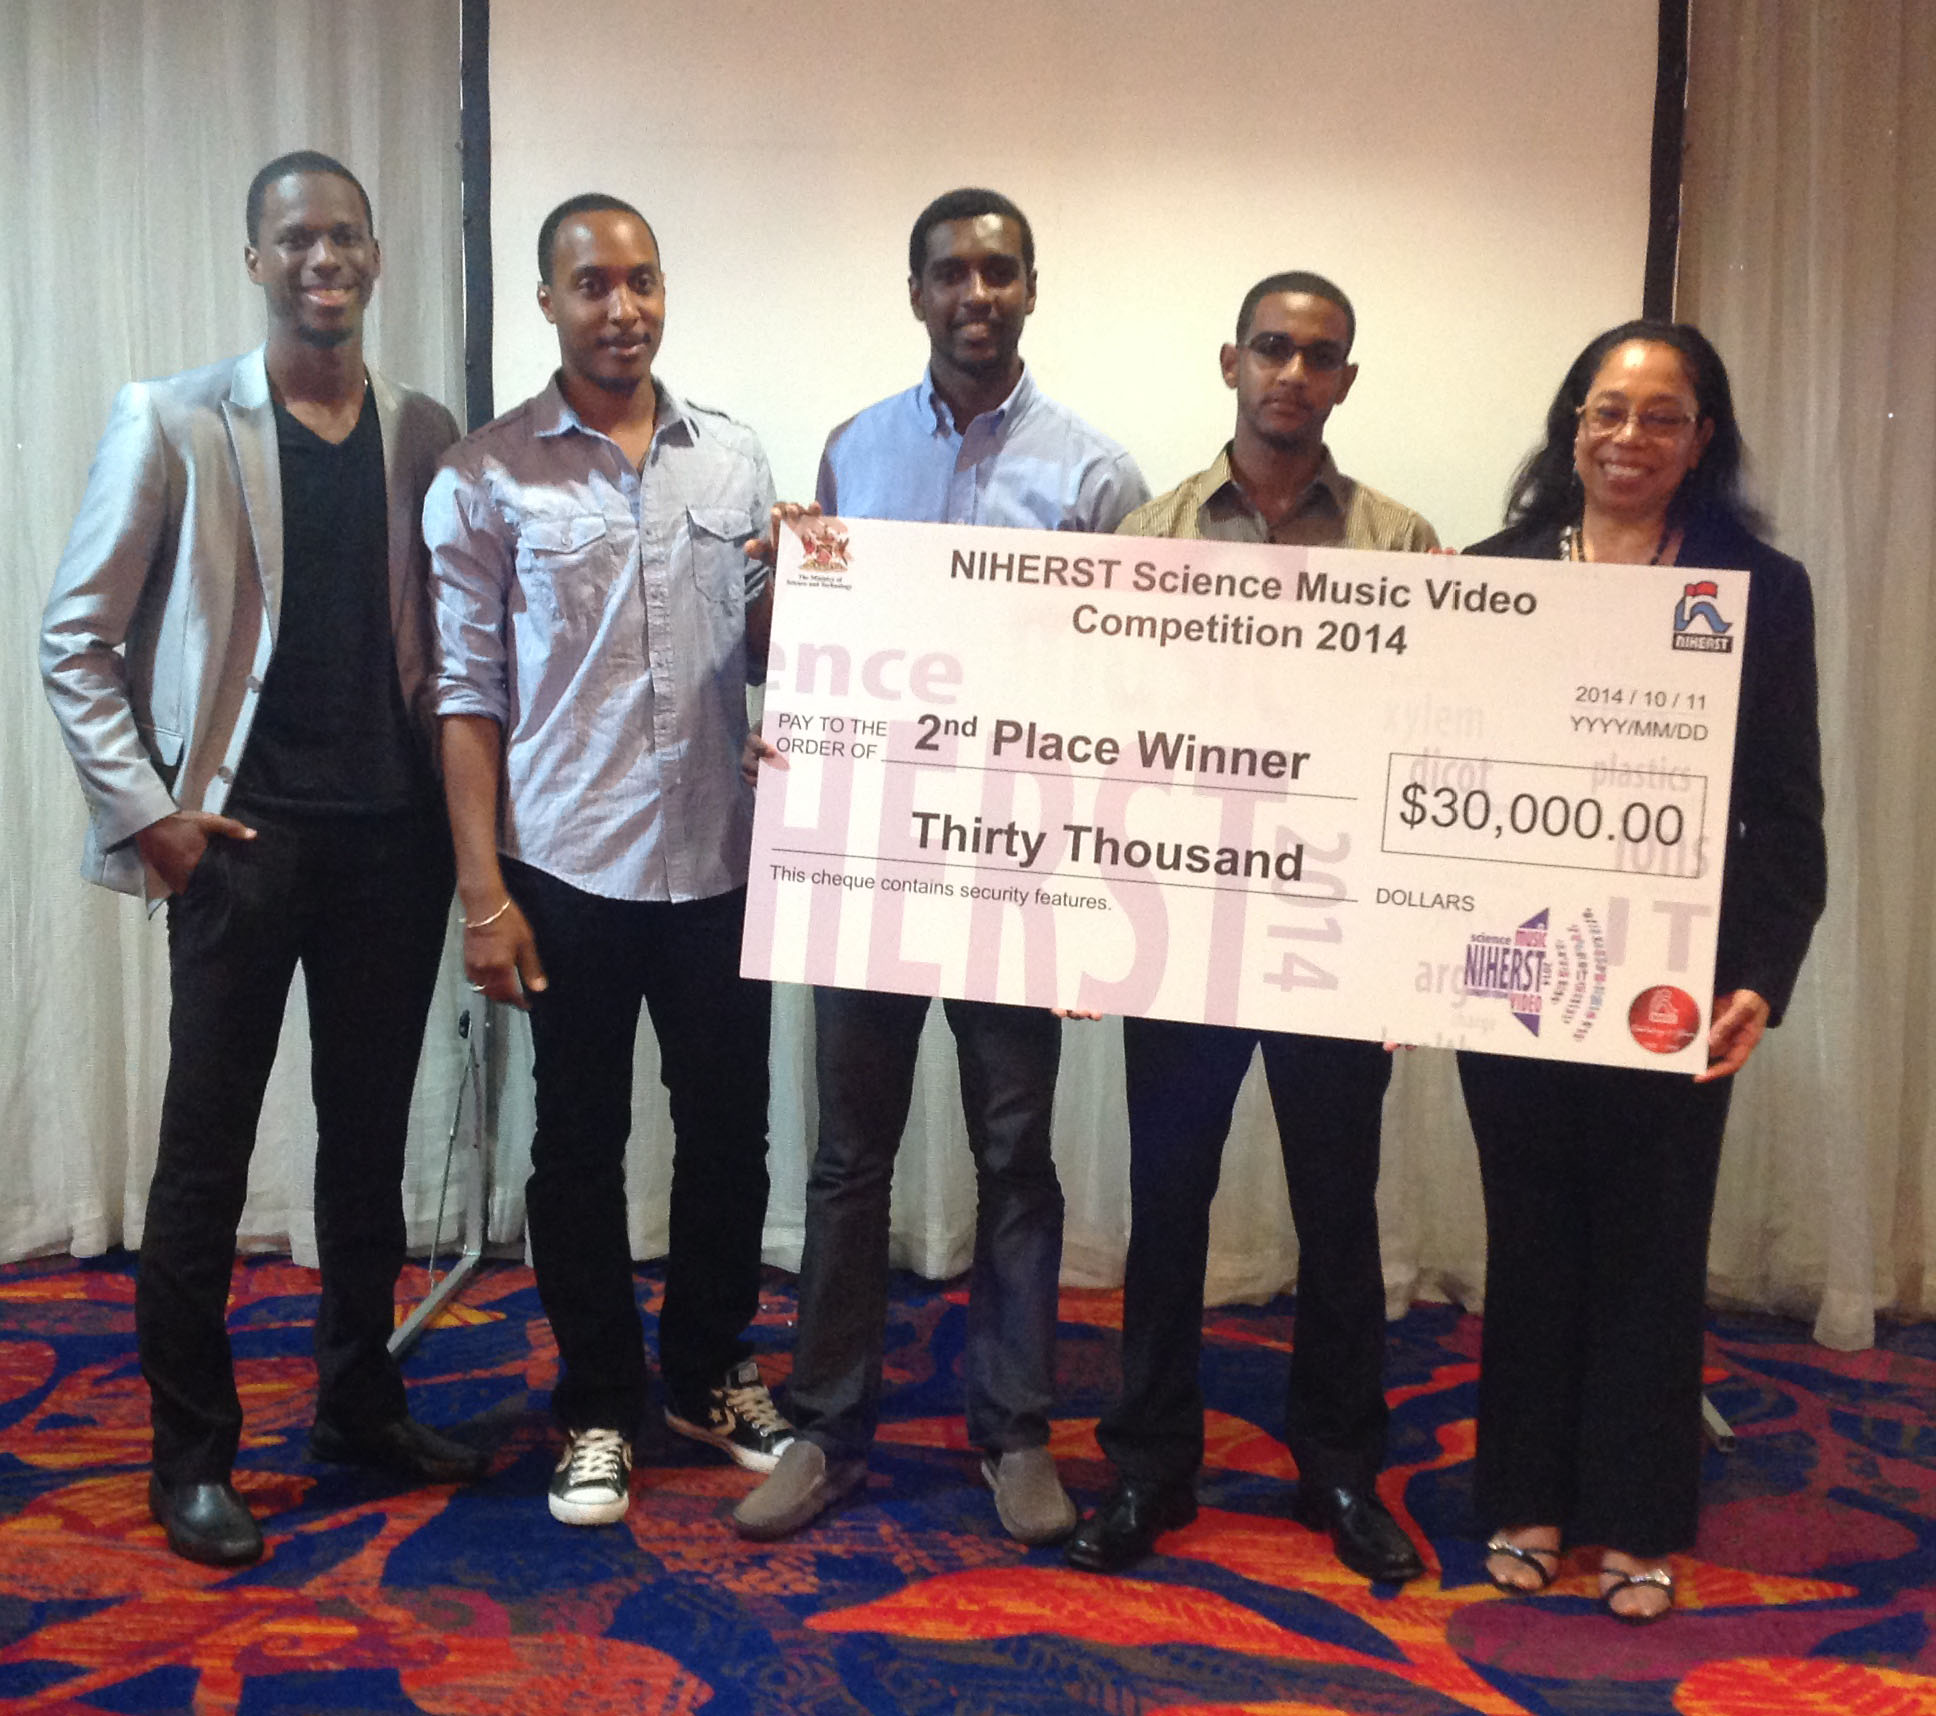 Second place winners (from left): Keron Woodley, Justin Pollonais, Luke Smith and Jerome Smith, with Joycelyn Lee Young 